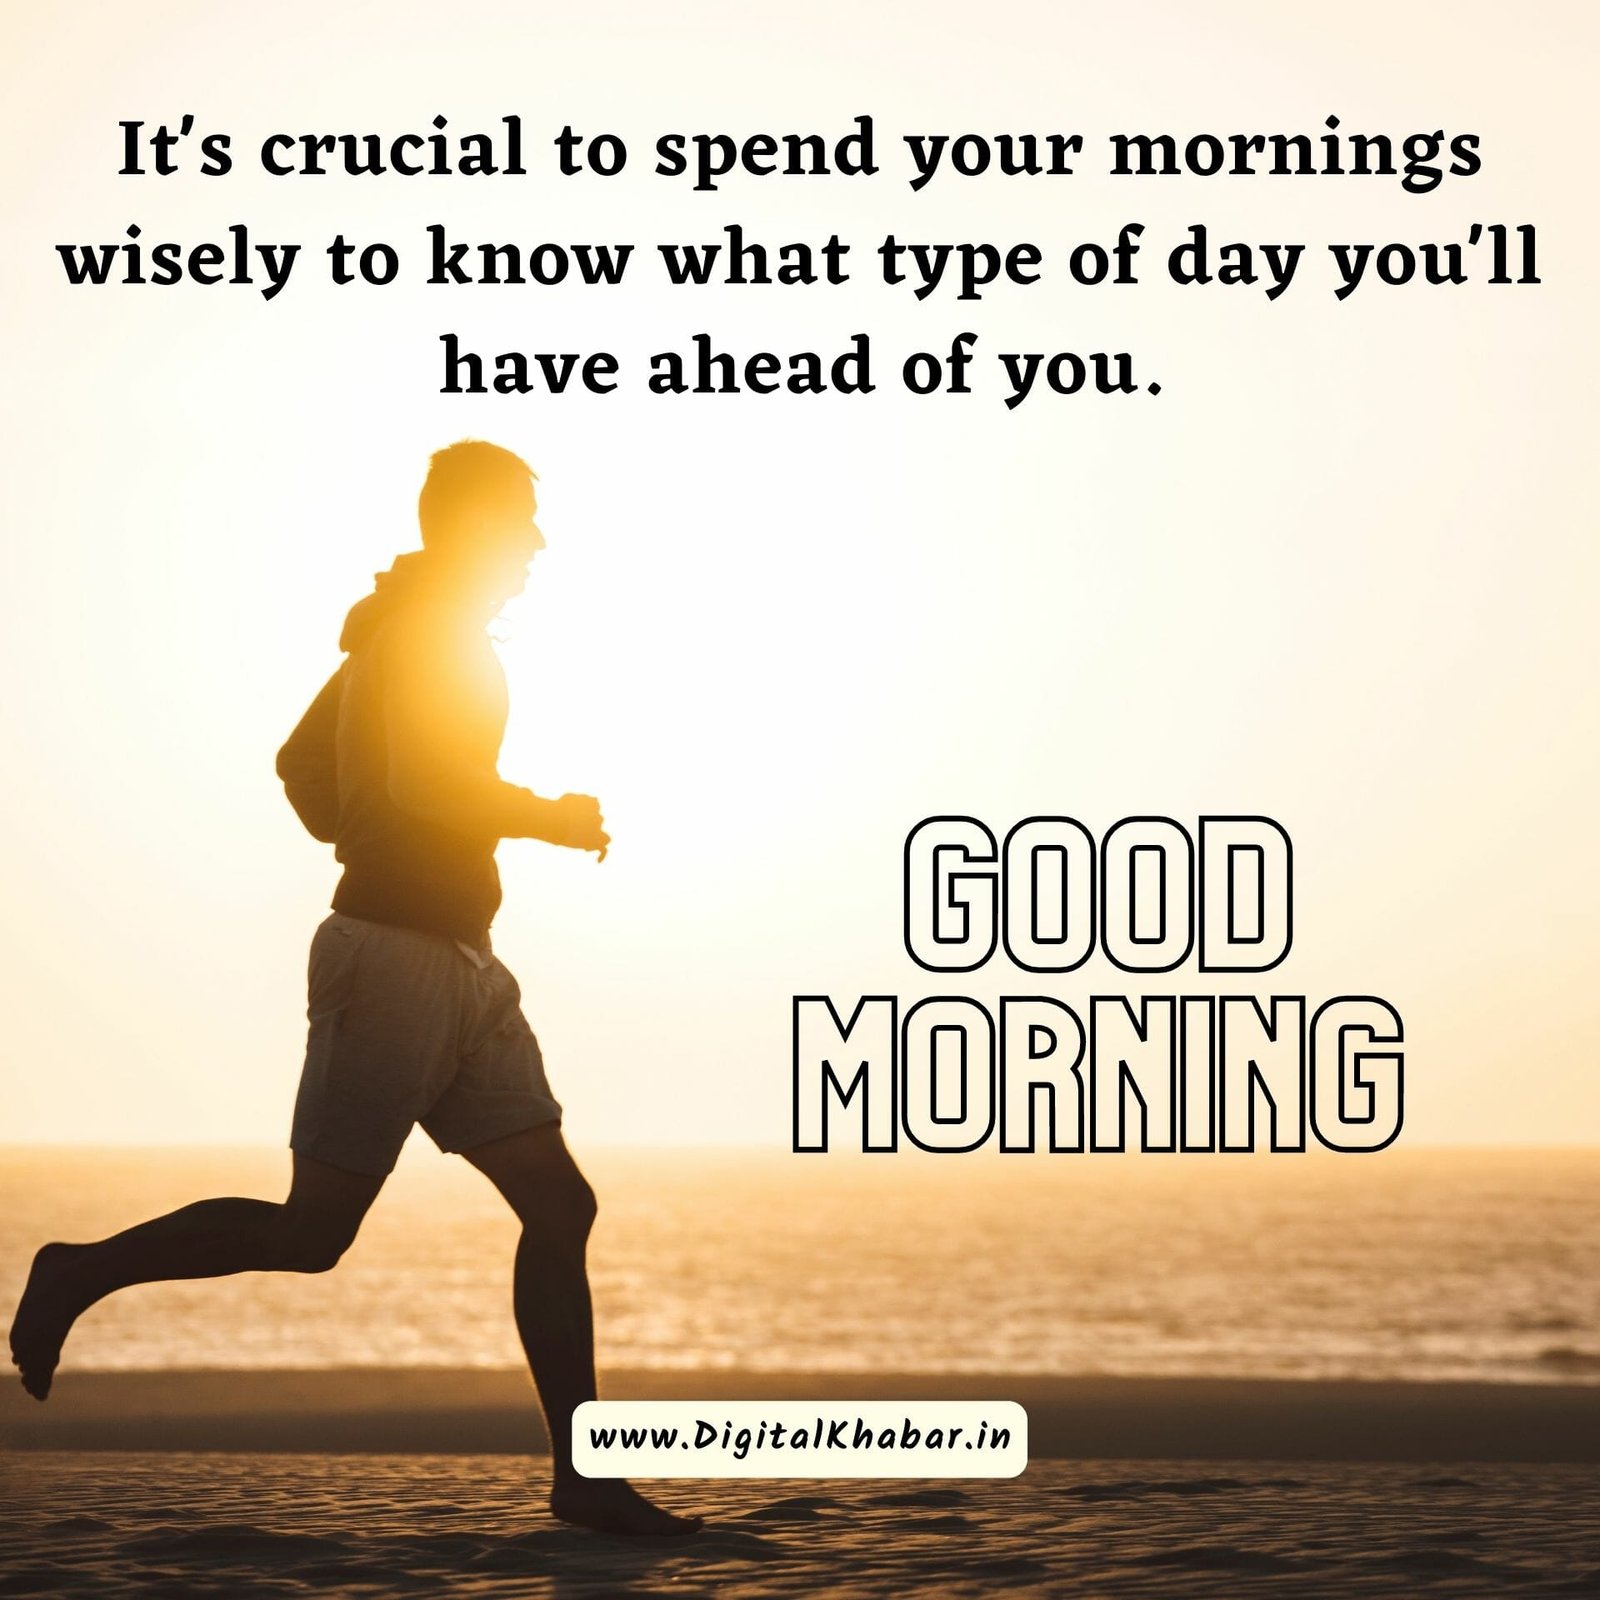 good morning images and quotes running